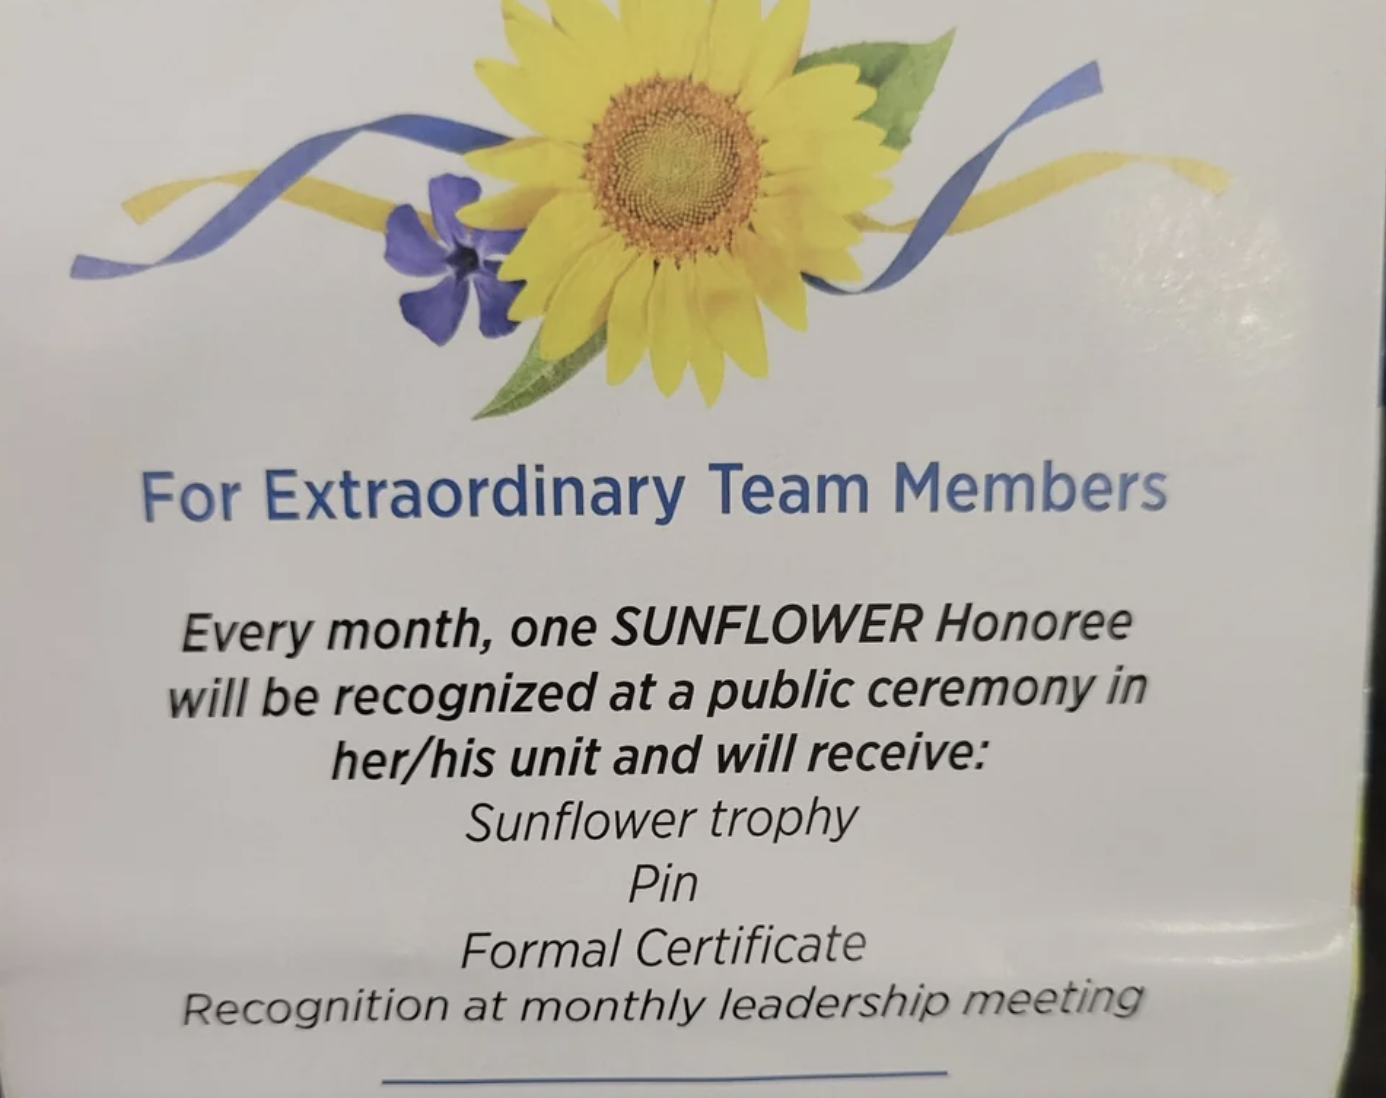 daisy - For Extraordinary Team Members Every month, one Sunflower Honoree will be recognized at a public ceremony in herhis unit and will receive Sunflower trophy Pin Formal Certificate Recognition at monthly leadership meeting